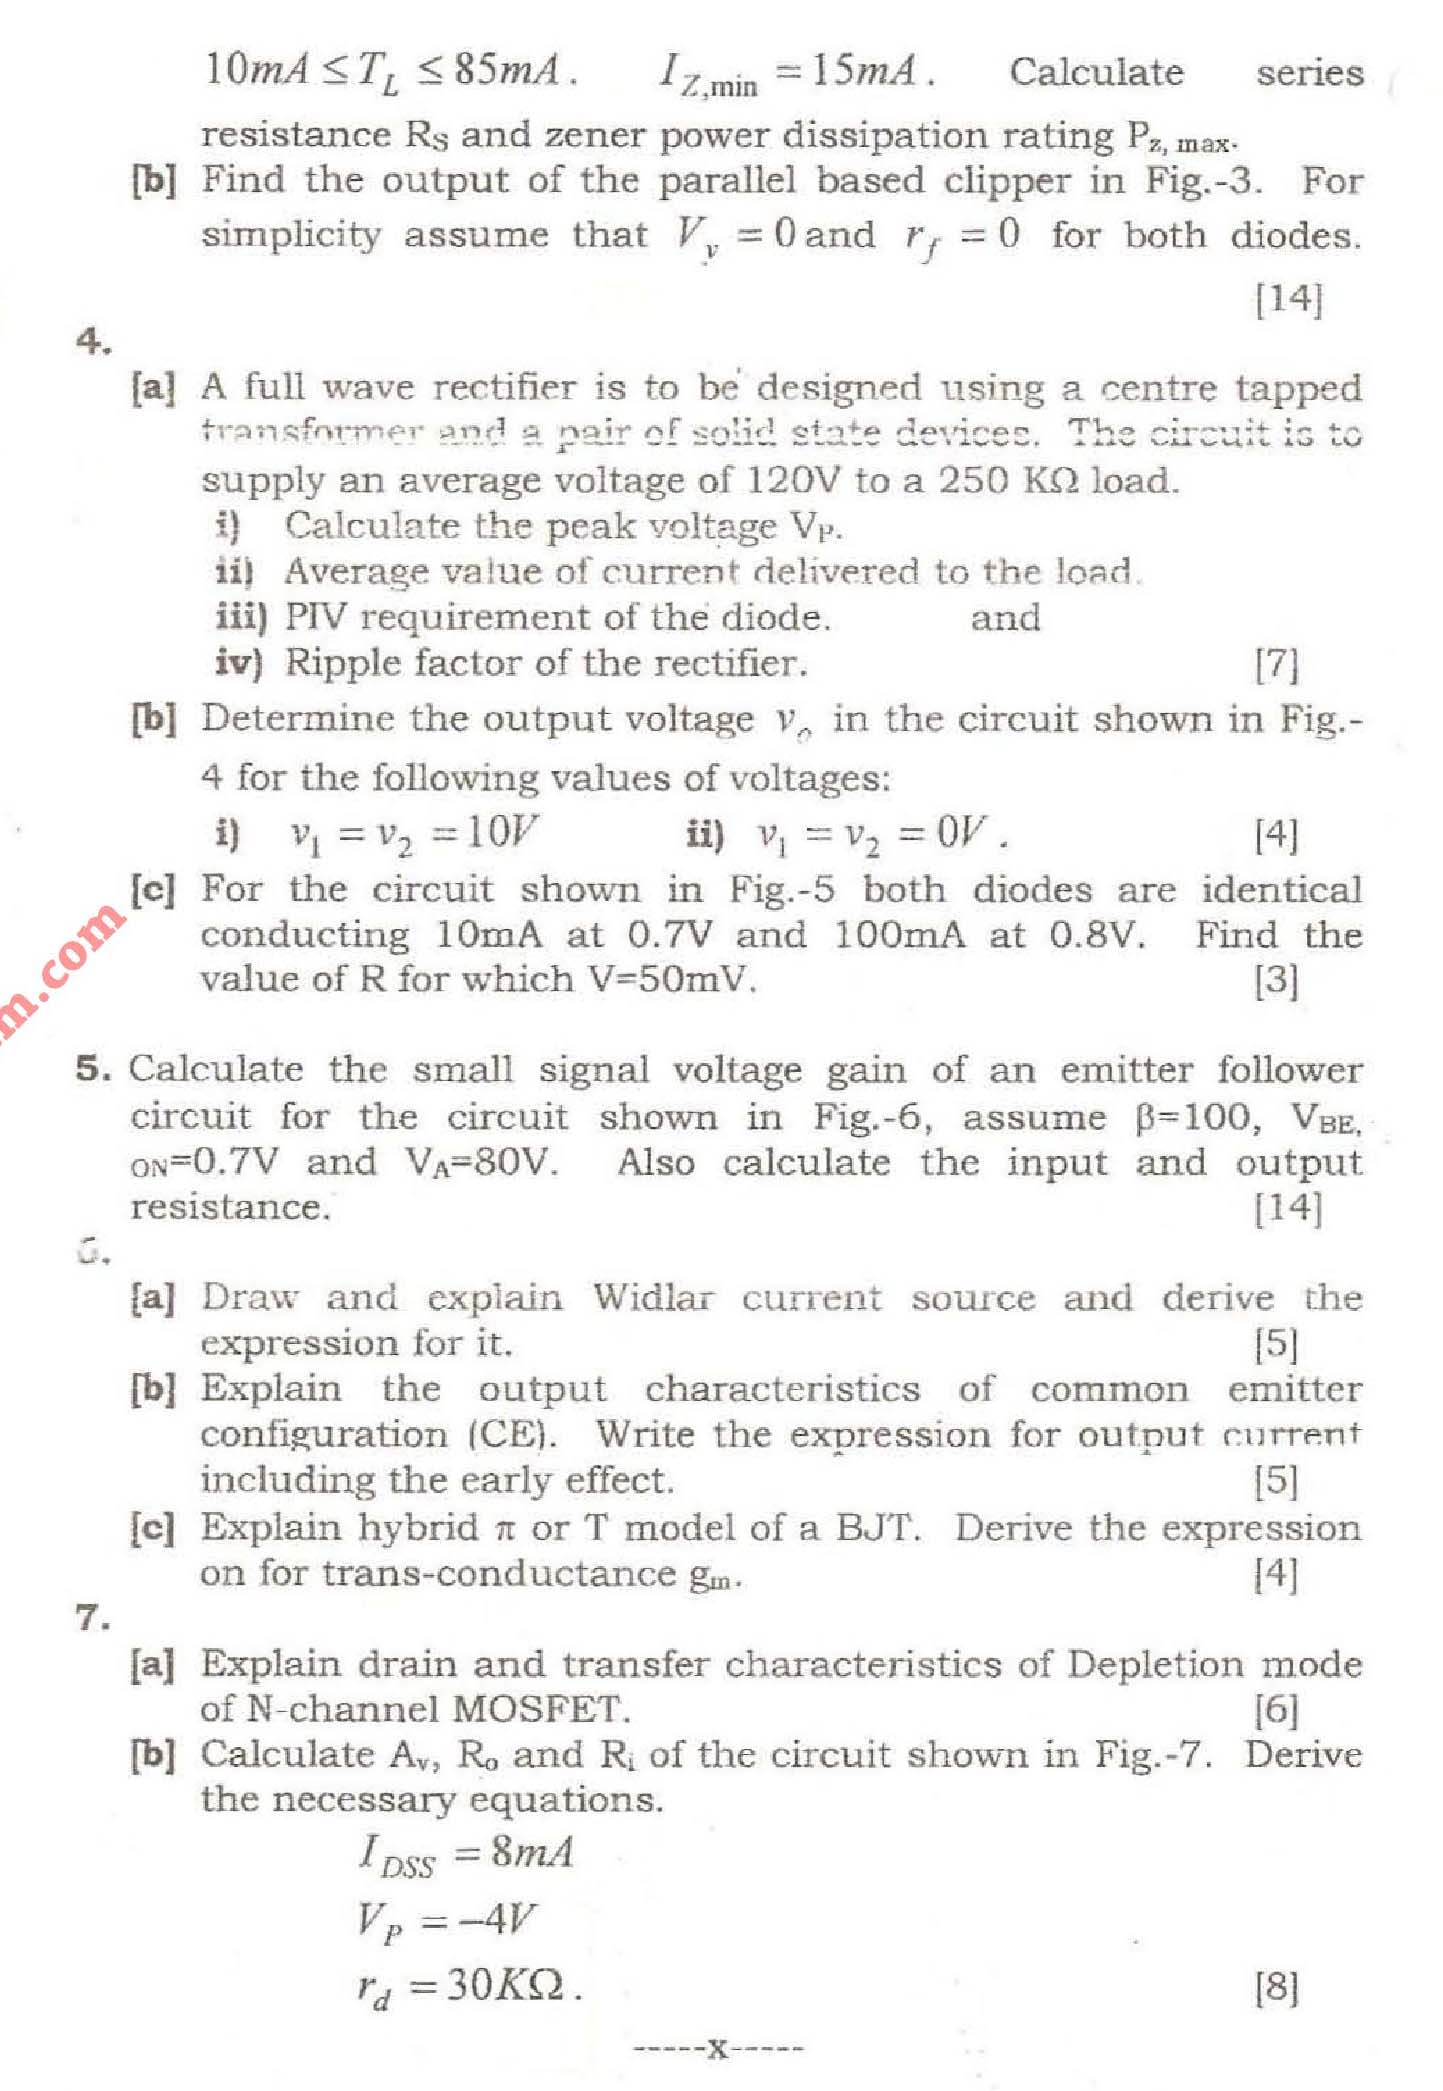 NSIT Question Papers 2008  3 Semester - End Sem - EC-COE-EE-IC-201